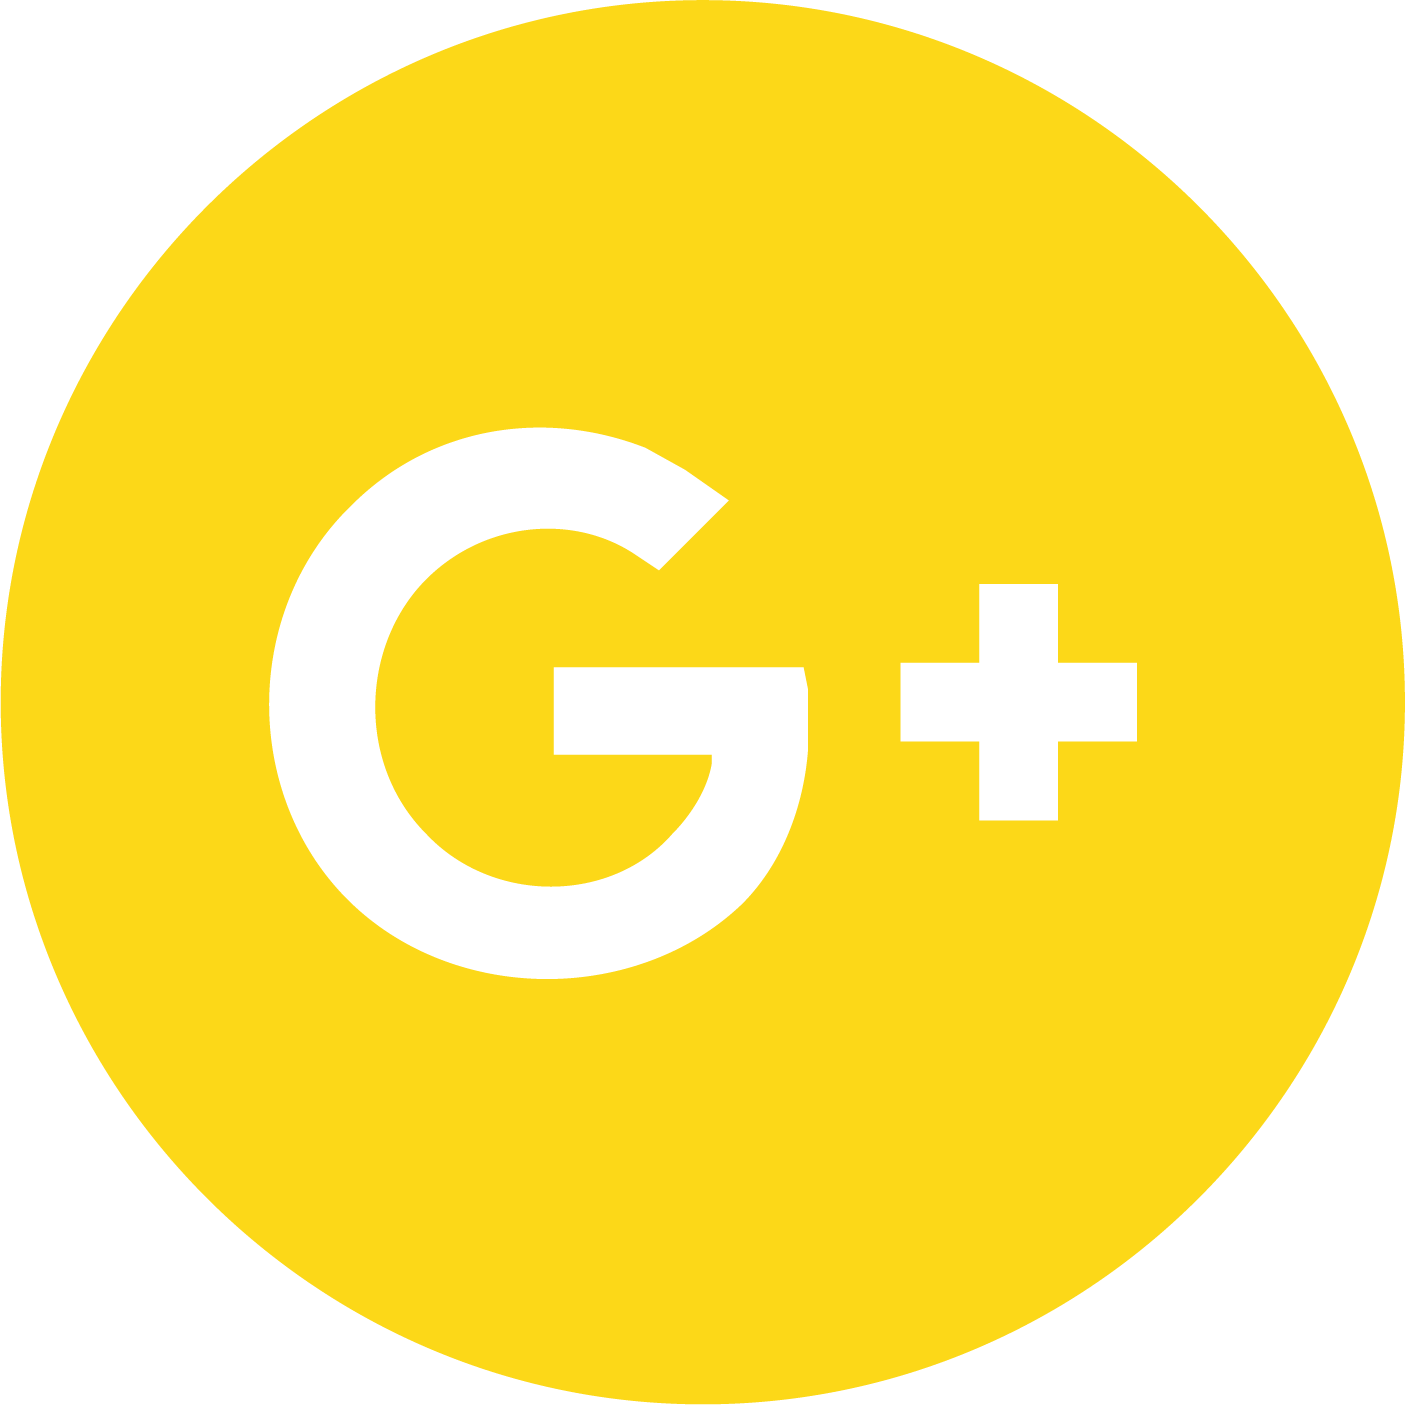 A Yellow Circle With Black Text